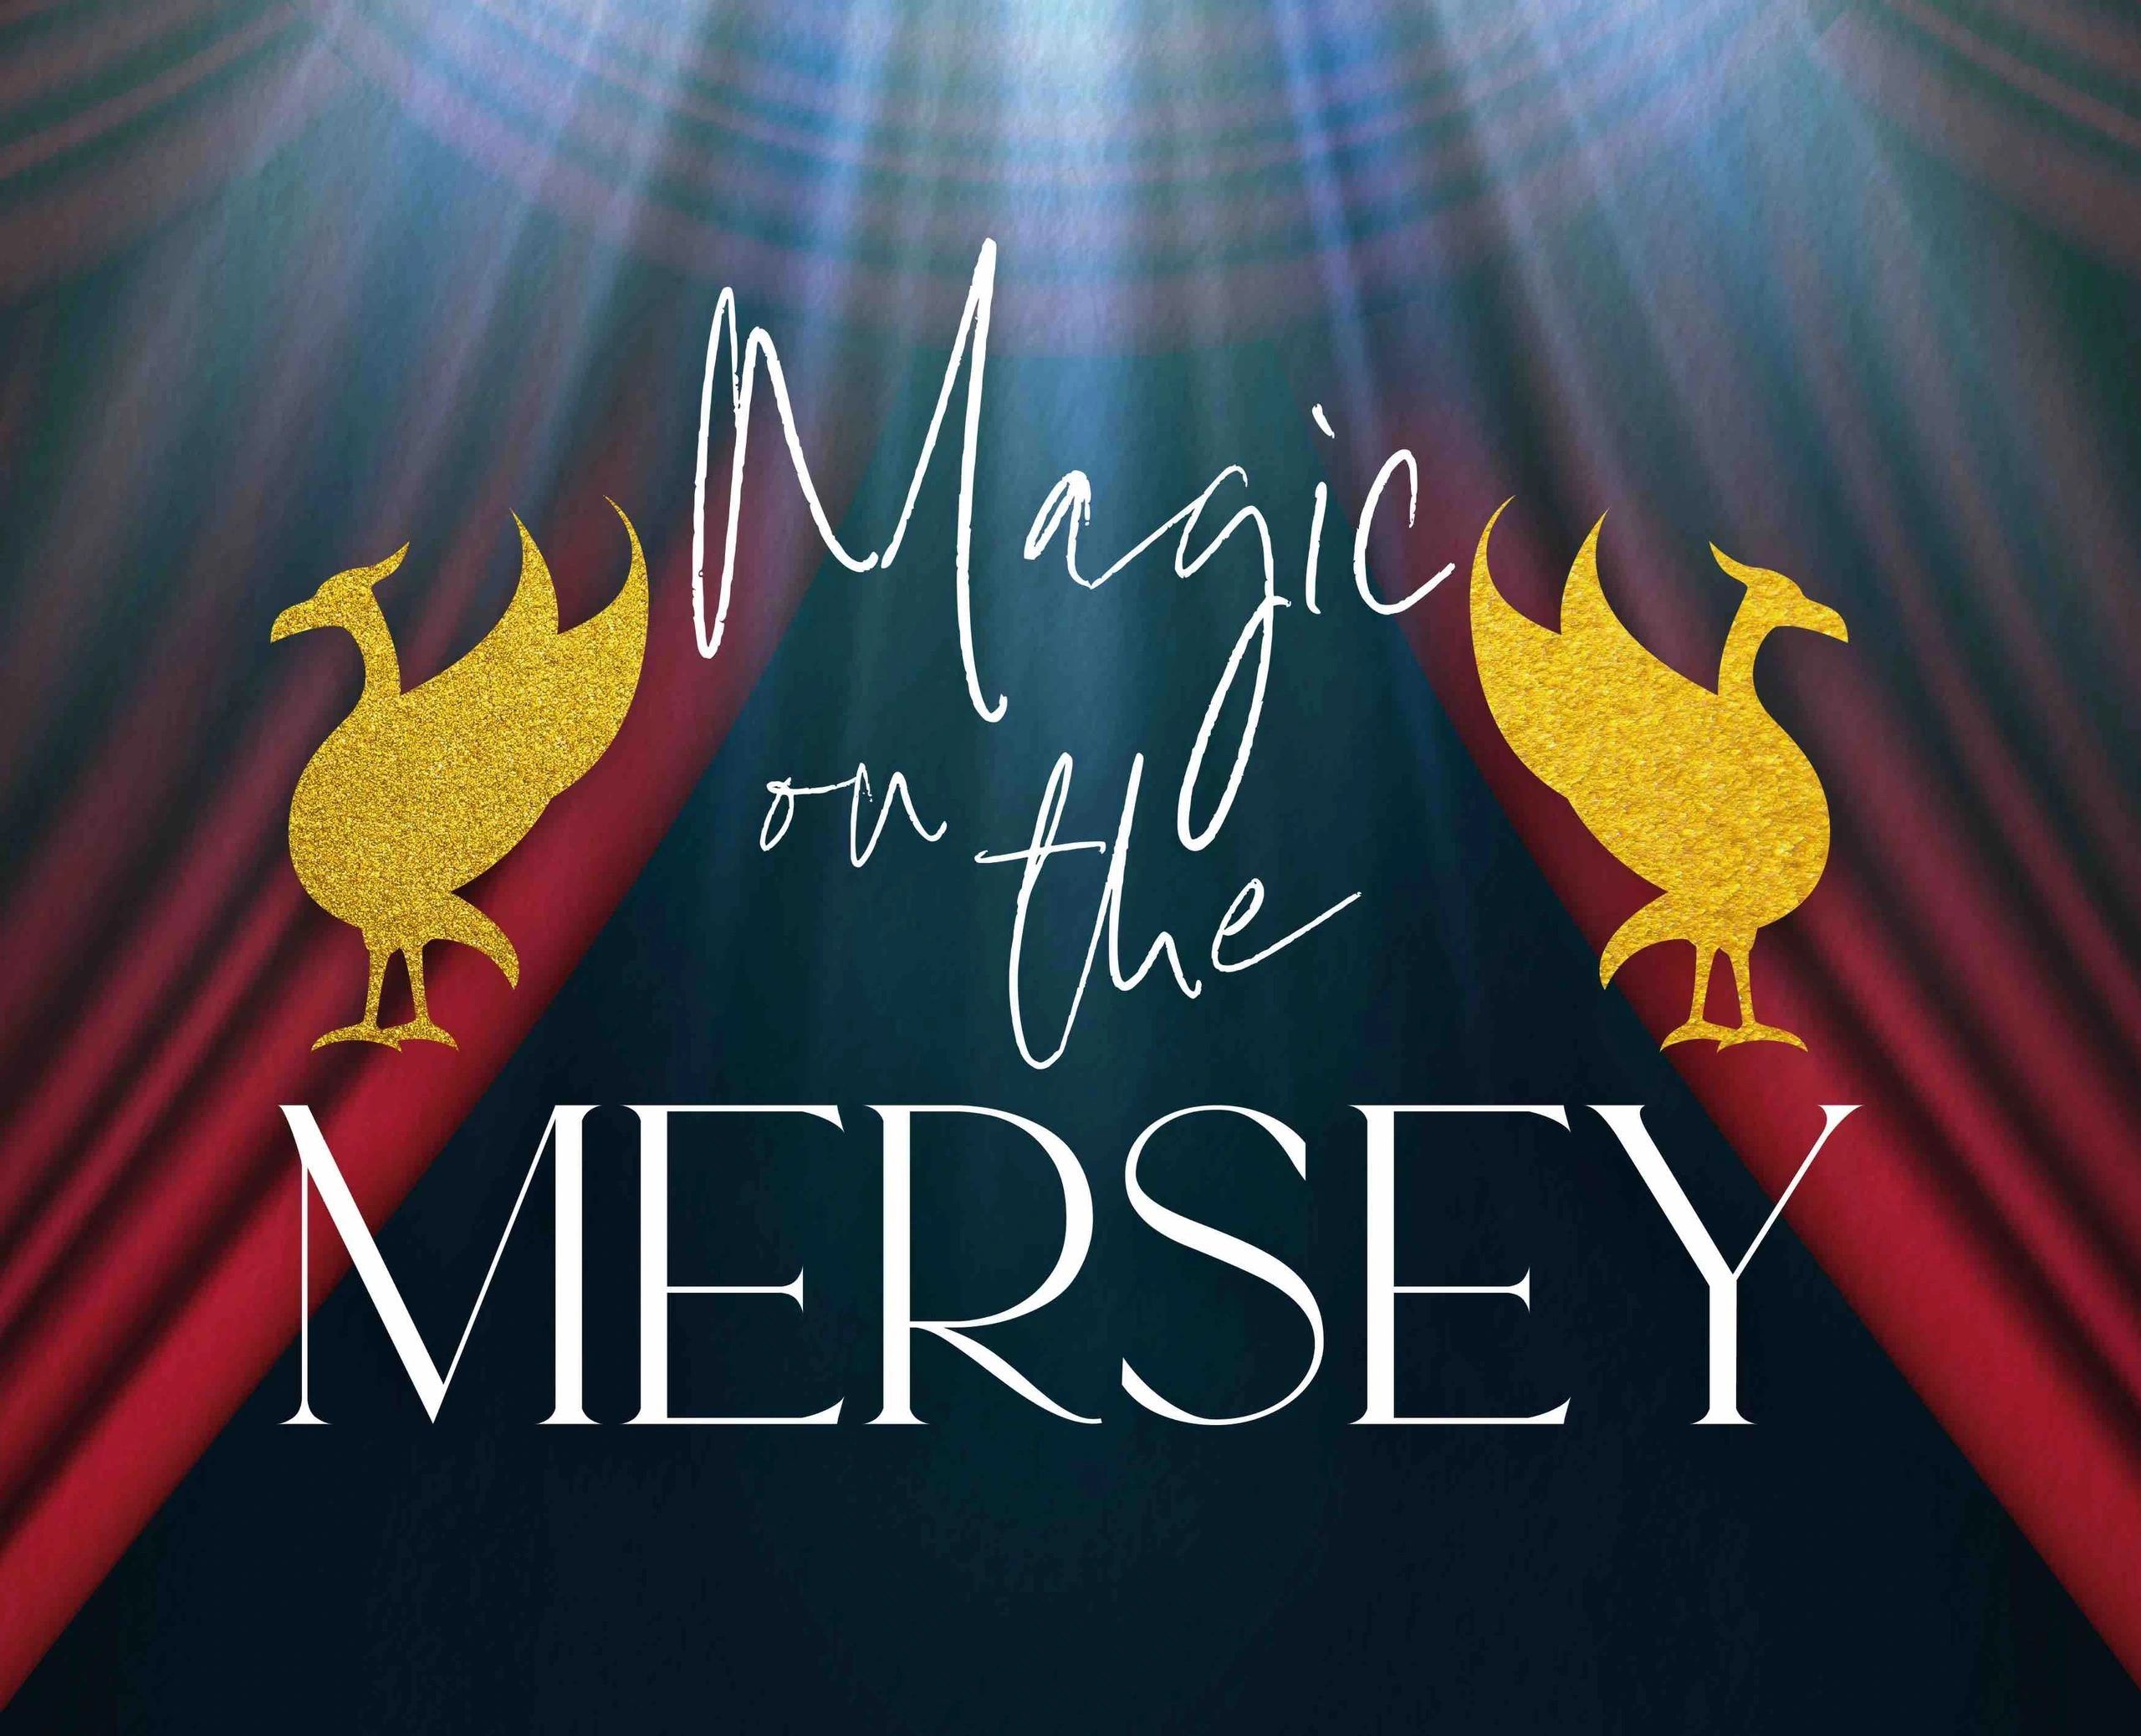 The Magic on the Mersey logo, featuring the two iconic Liver birds